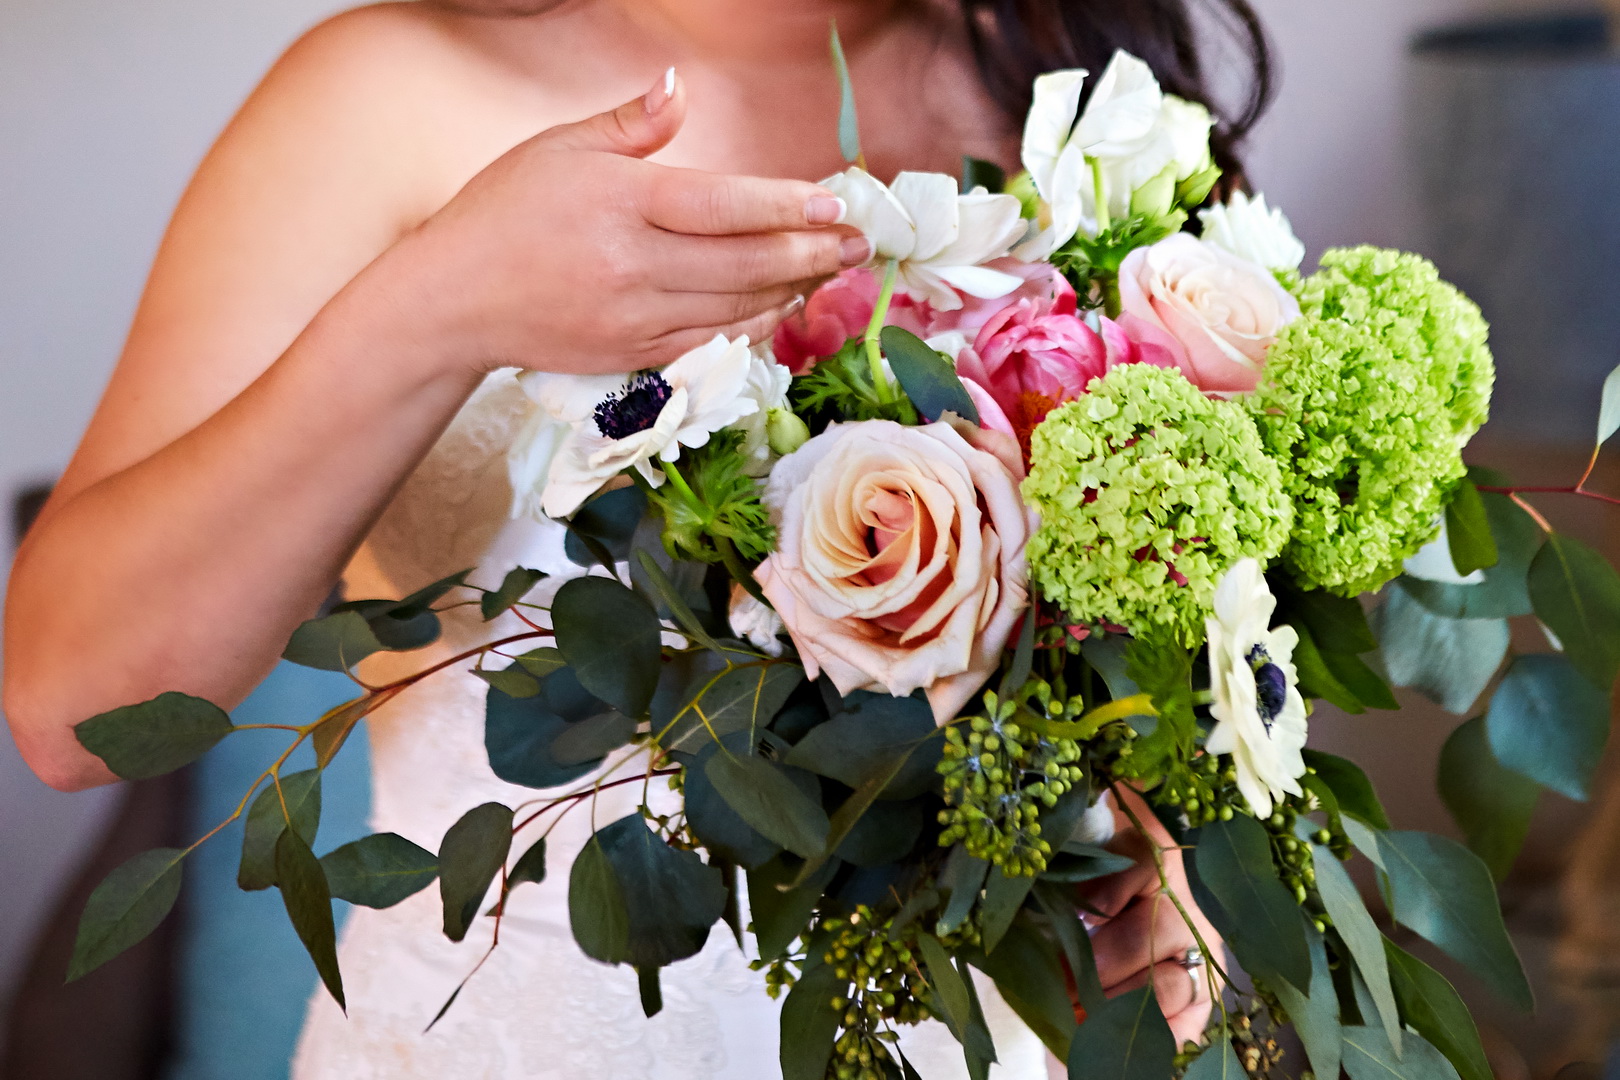 Close up detail of bride looking at bouquet of roses, anemones, and peonies.